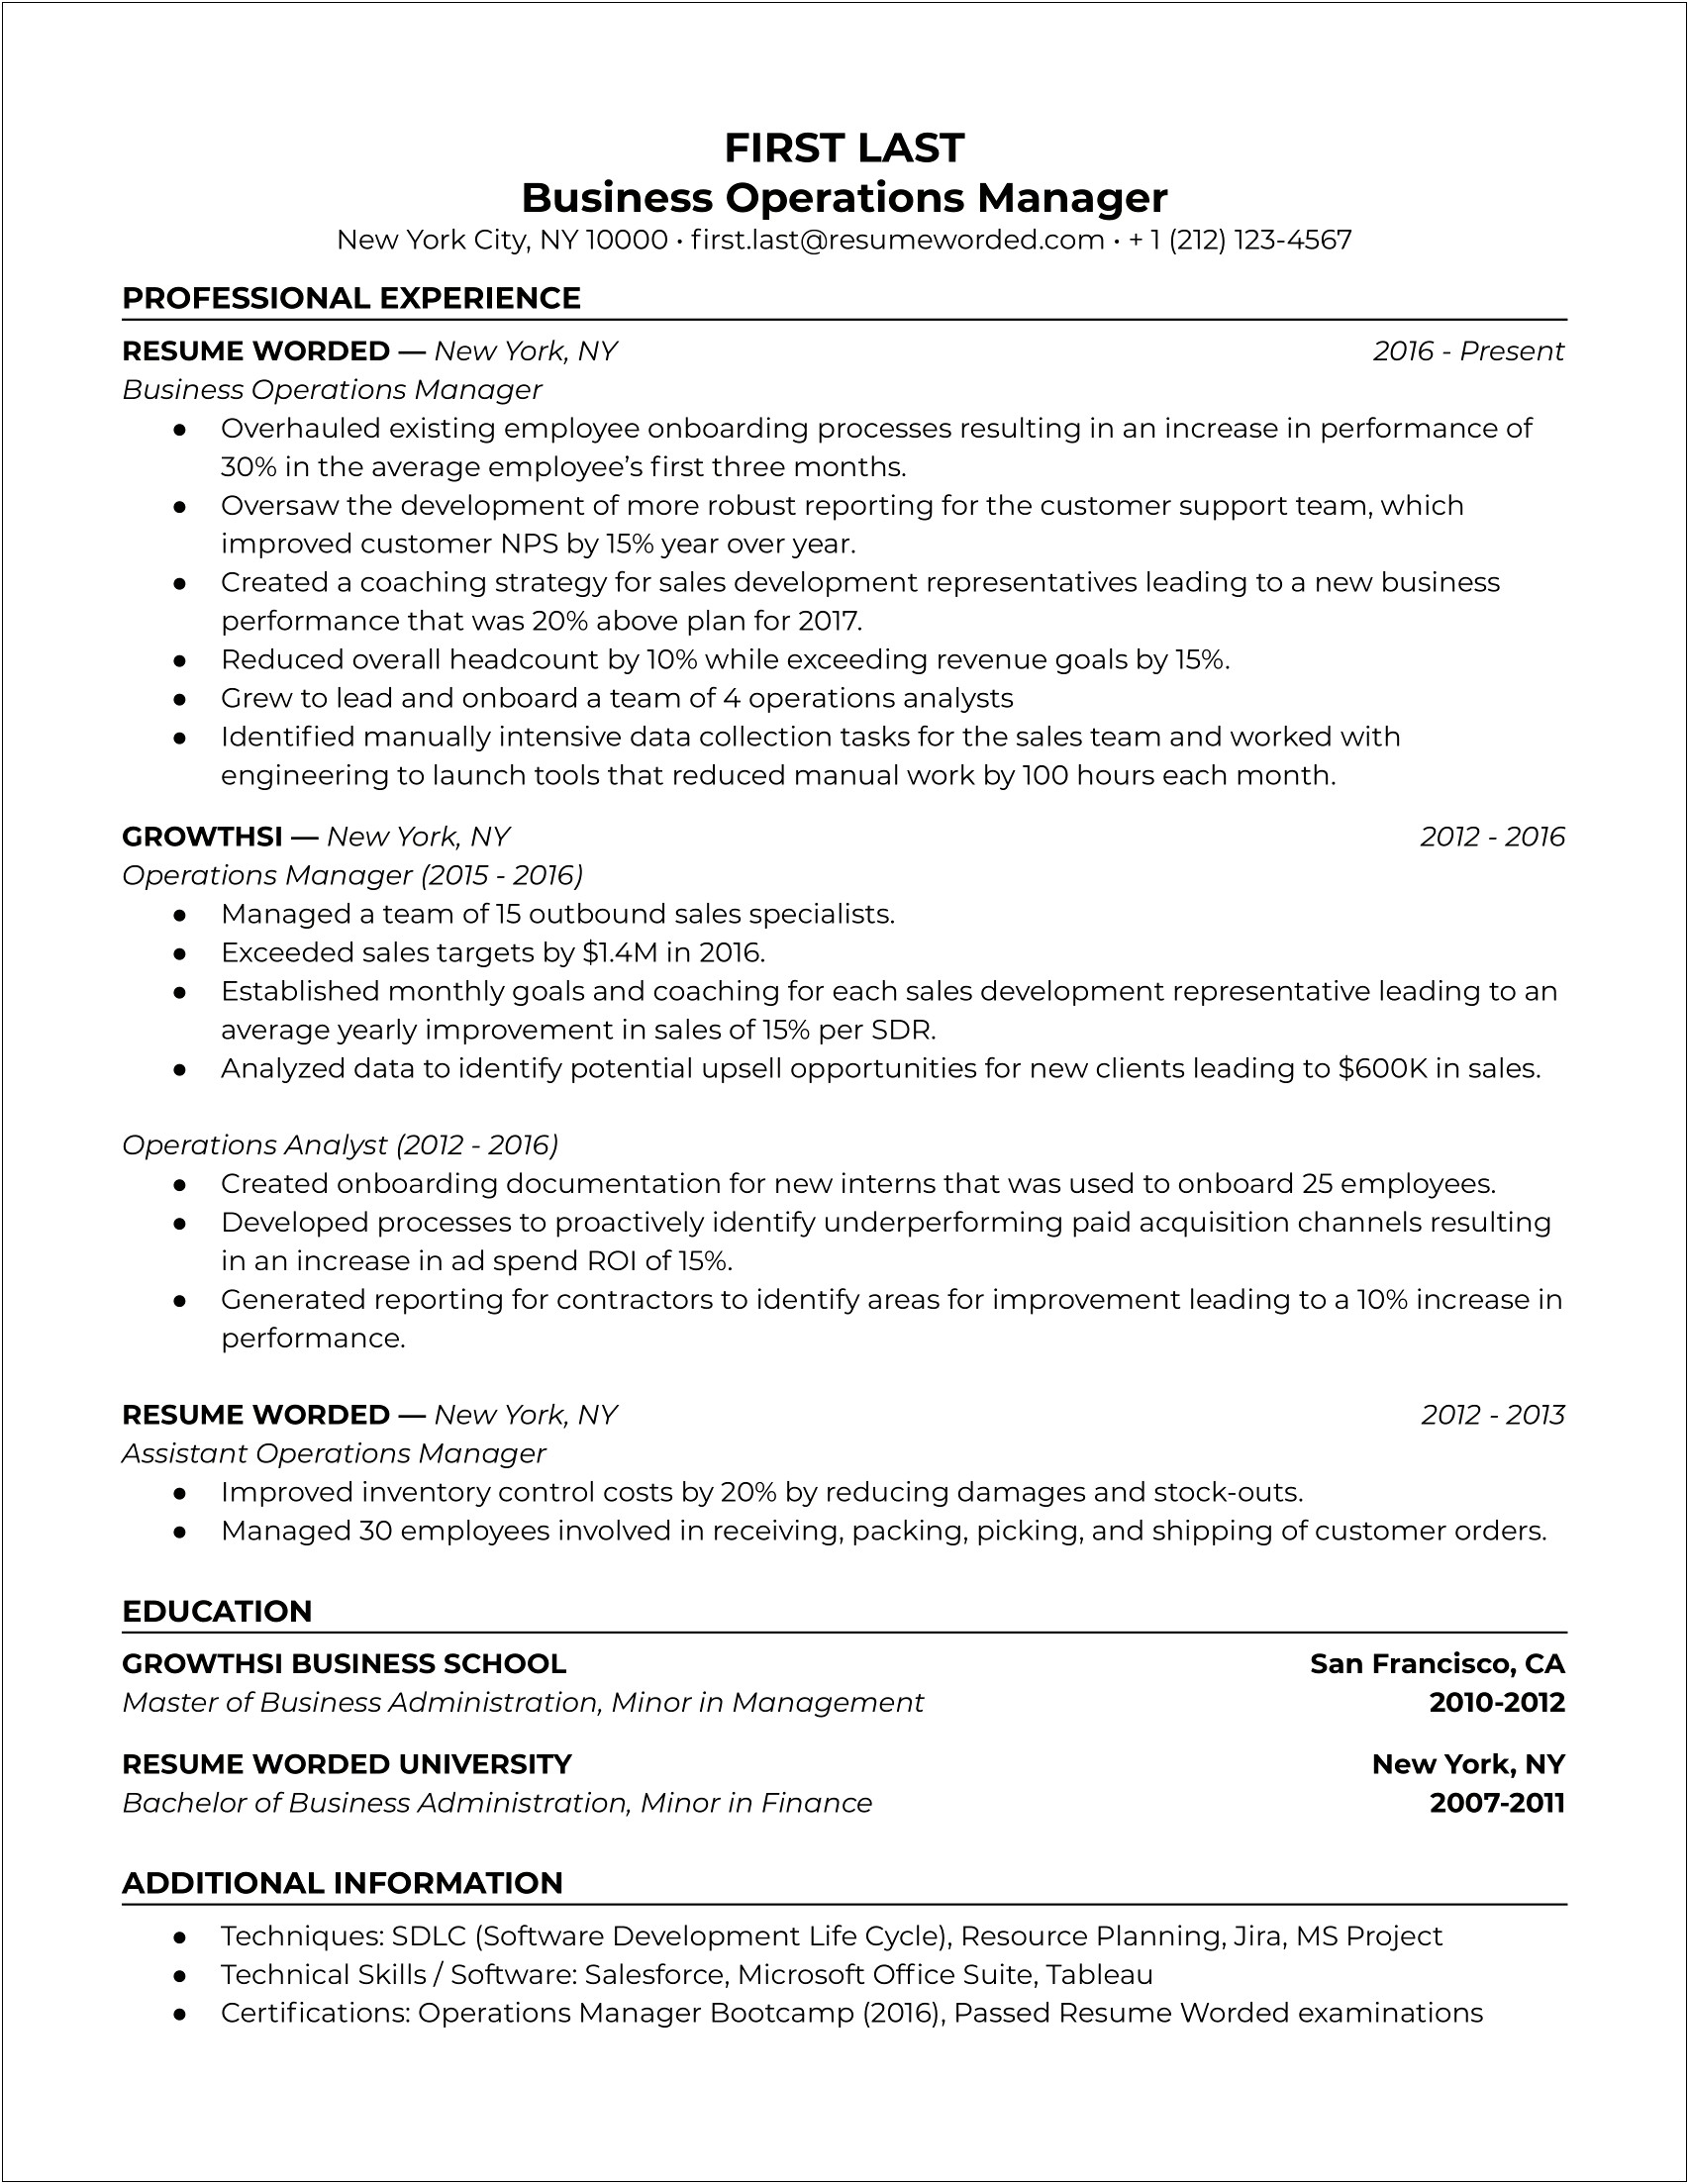 Resume For Business Operations Manager